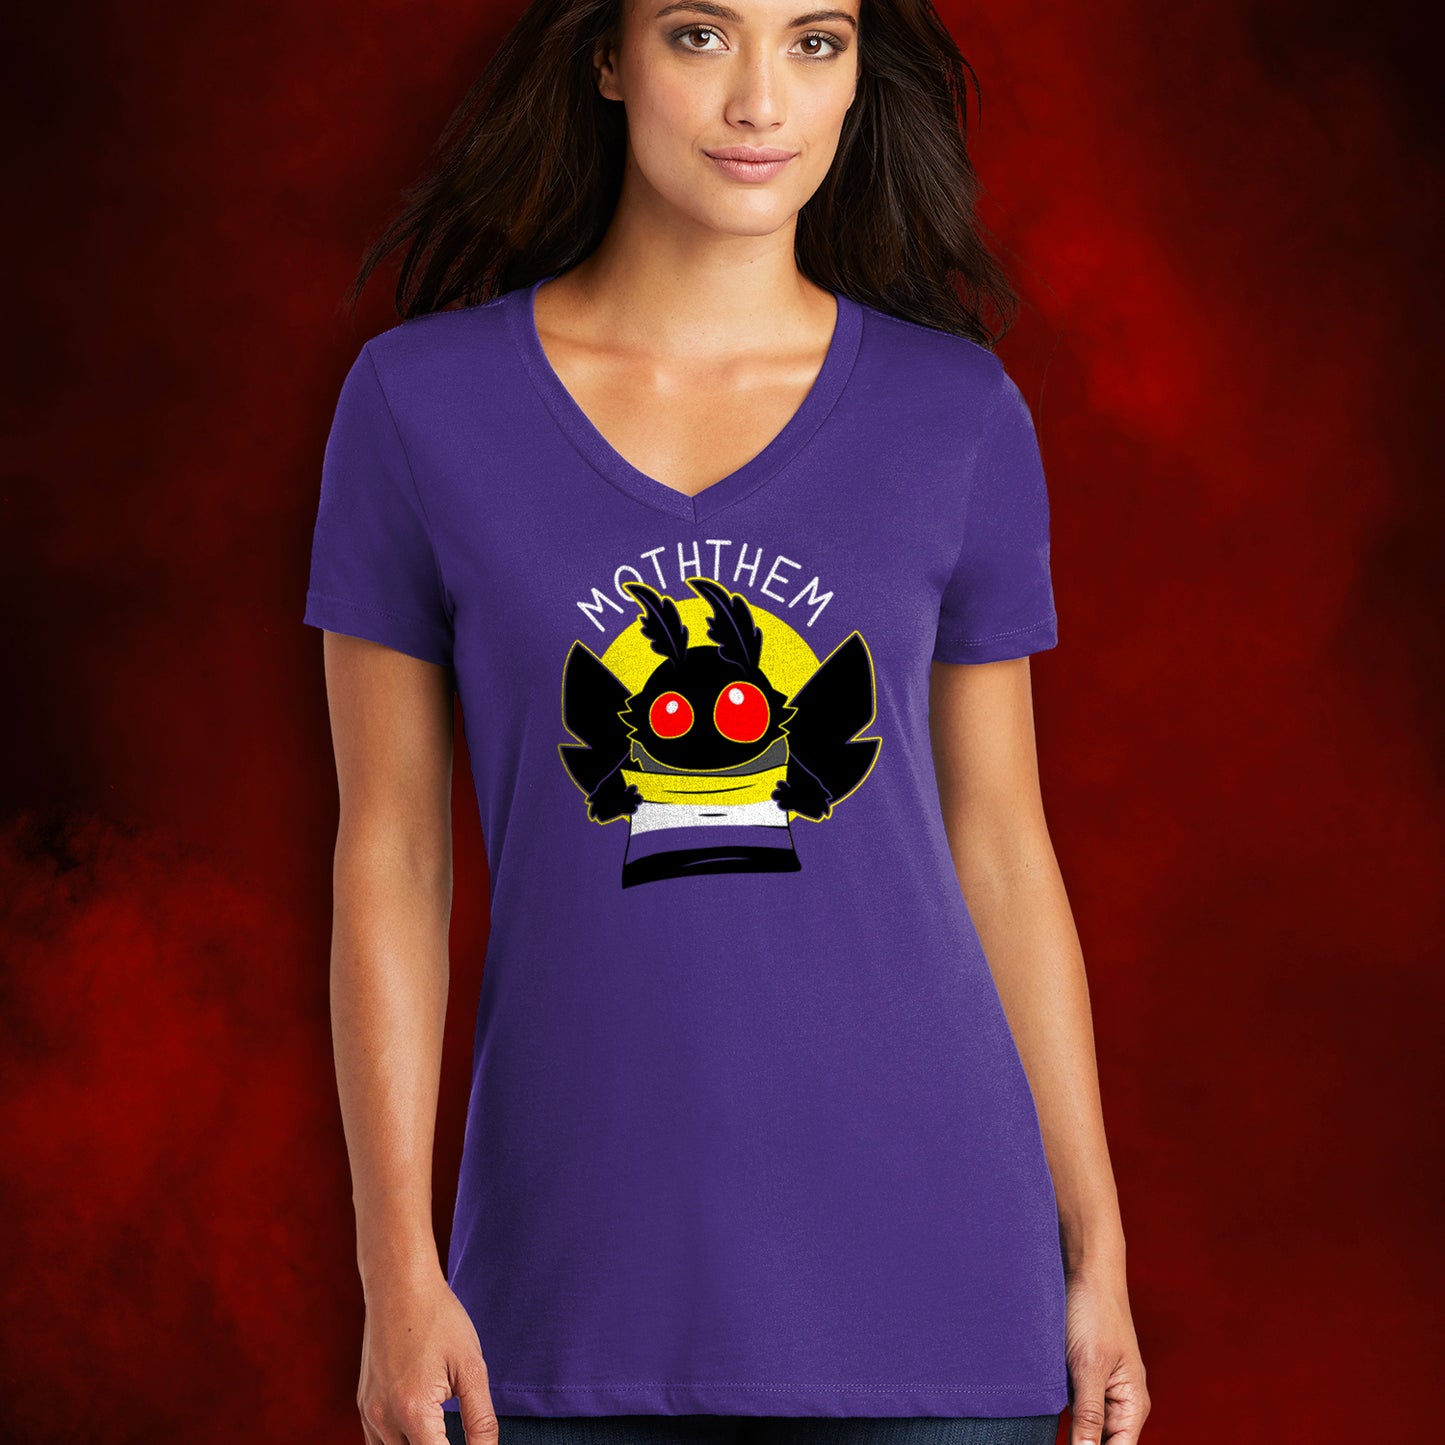 A female model wearing a purple T-shirt. A yellow circle in the center has a black moth head with red eyes, and black wings at the sides. The moth is holding a Non-binary Pride flag, in yellow, purple, white, and black. Above the image is white text saying "MOTHTHEM."  Behind the model is a smoky red background.